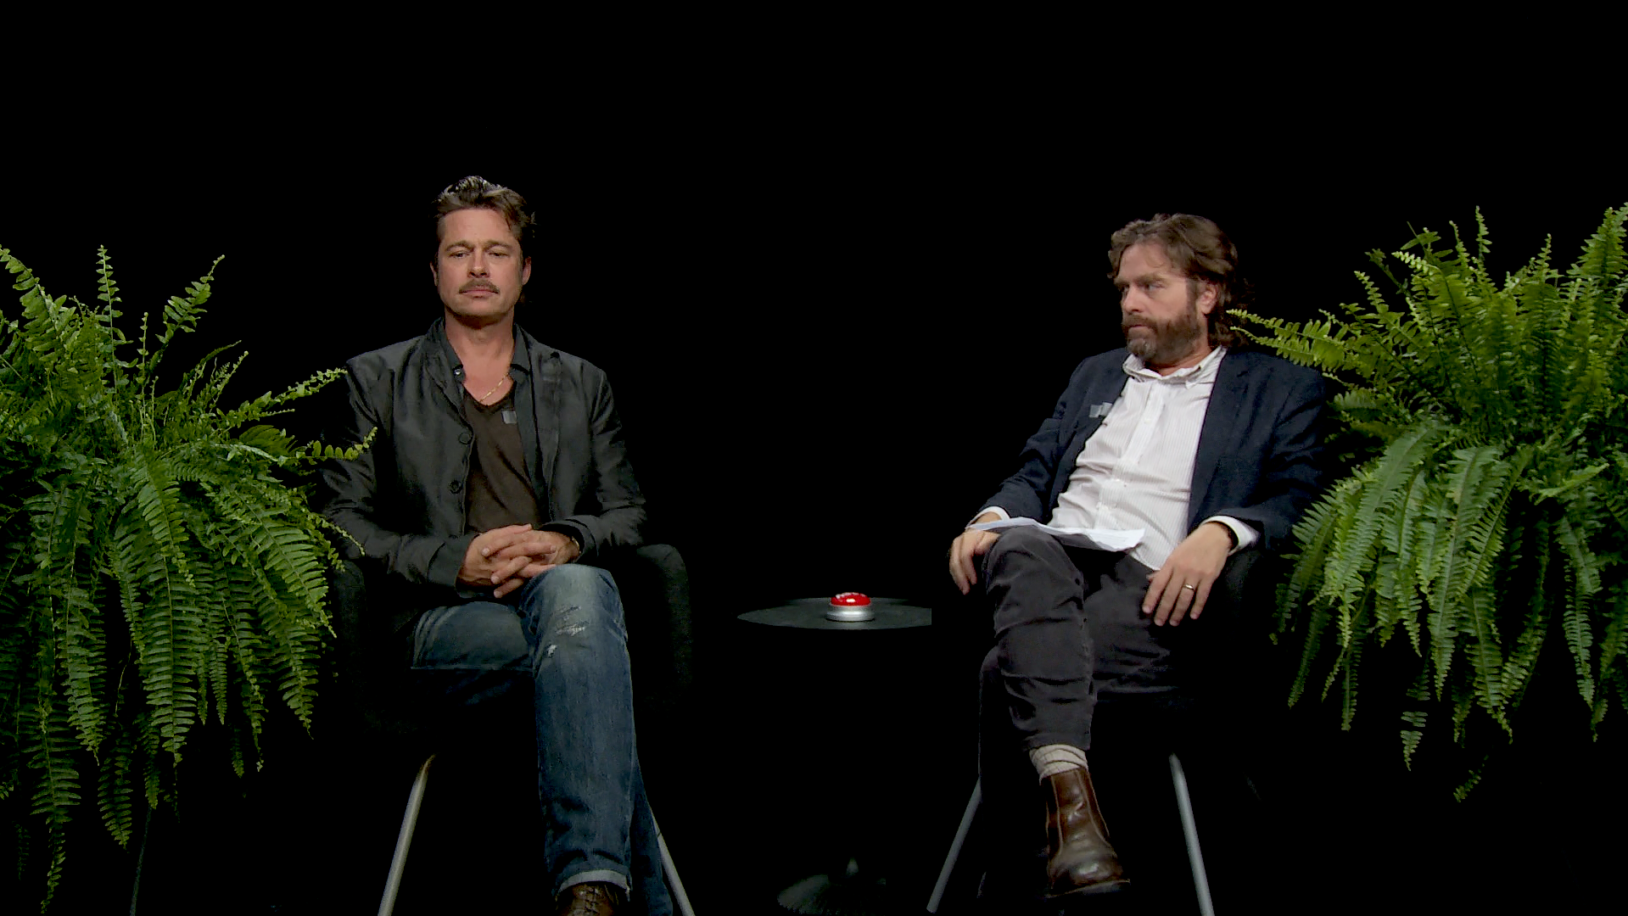 Between Two Ferns All episodes Watch full free online